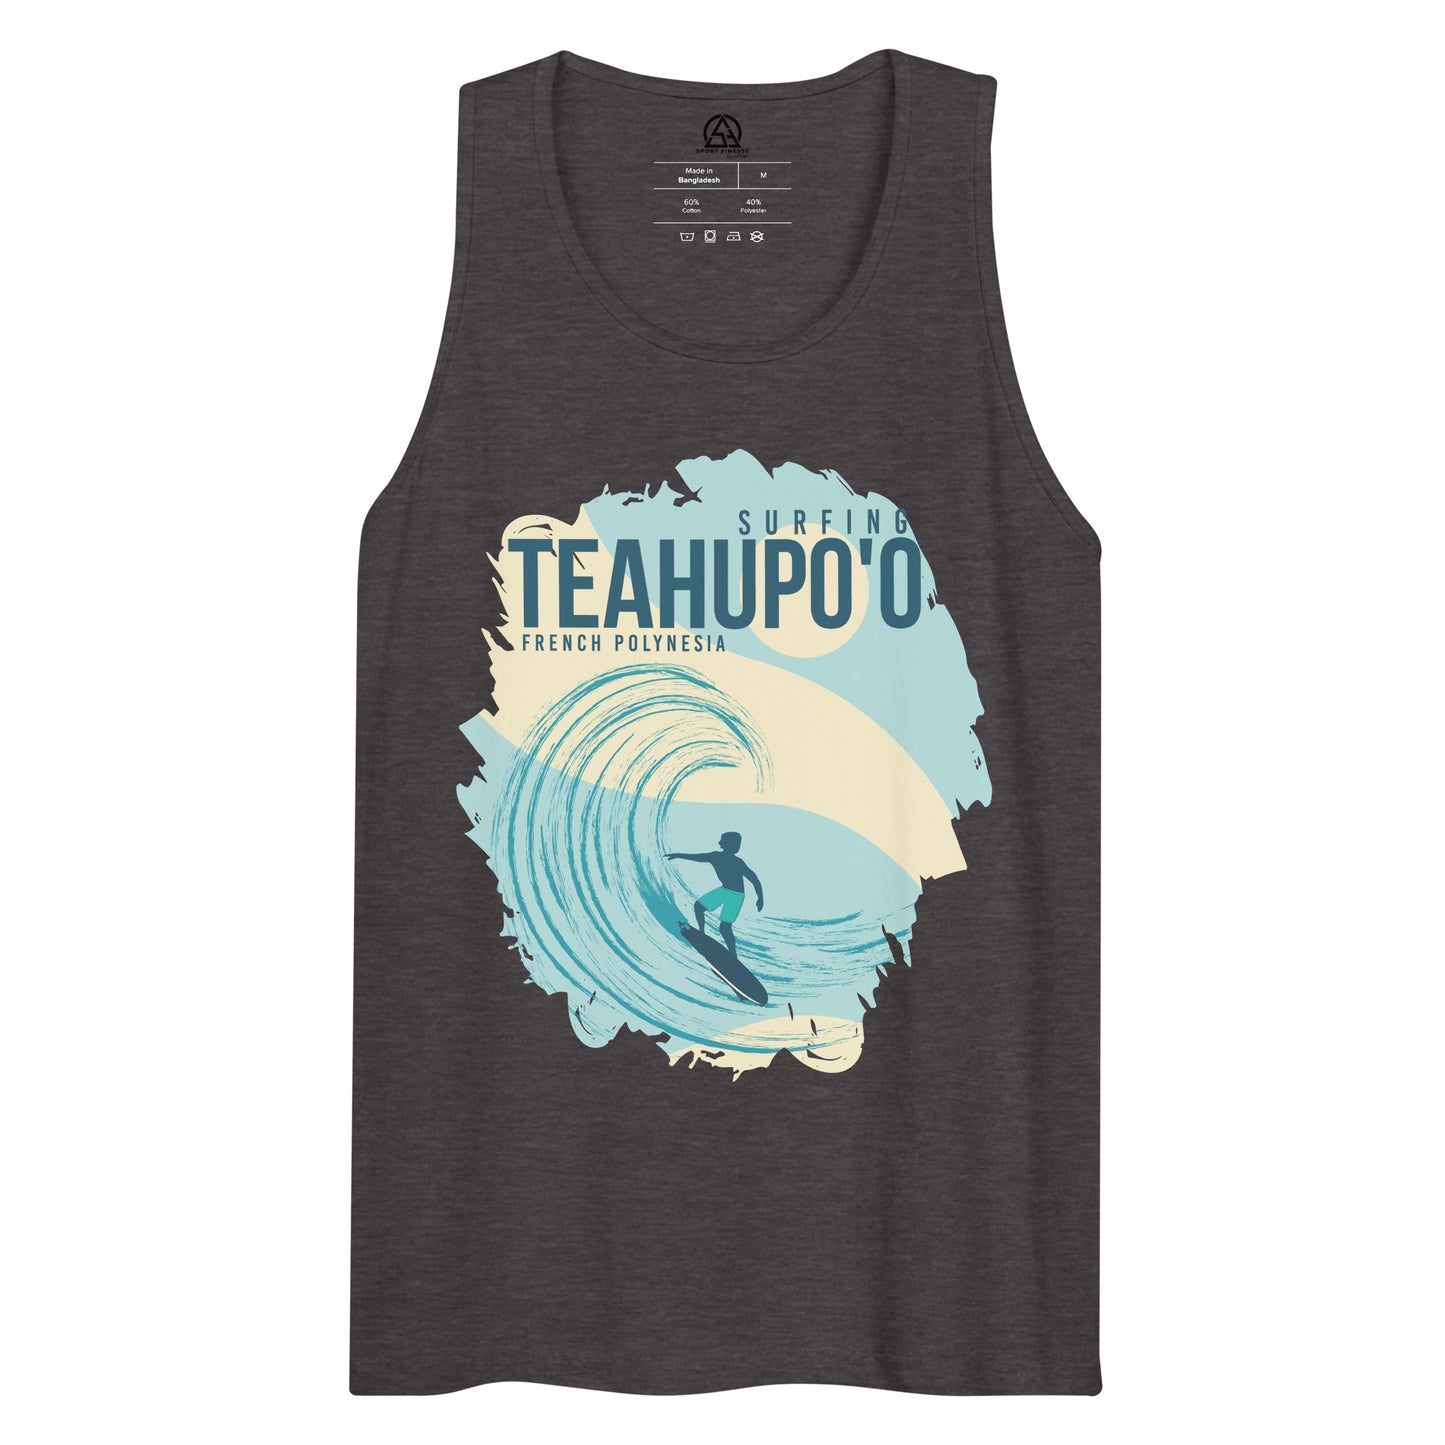 Teahupoo French Polynesia Men’s premium tank top - Charcoal Heather / S - Sport Finesse